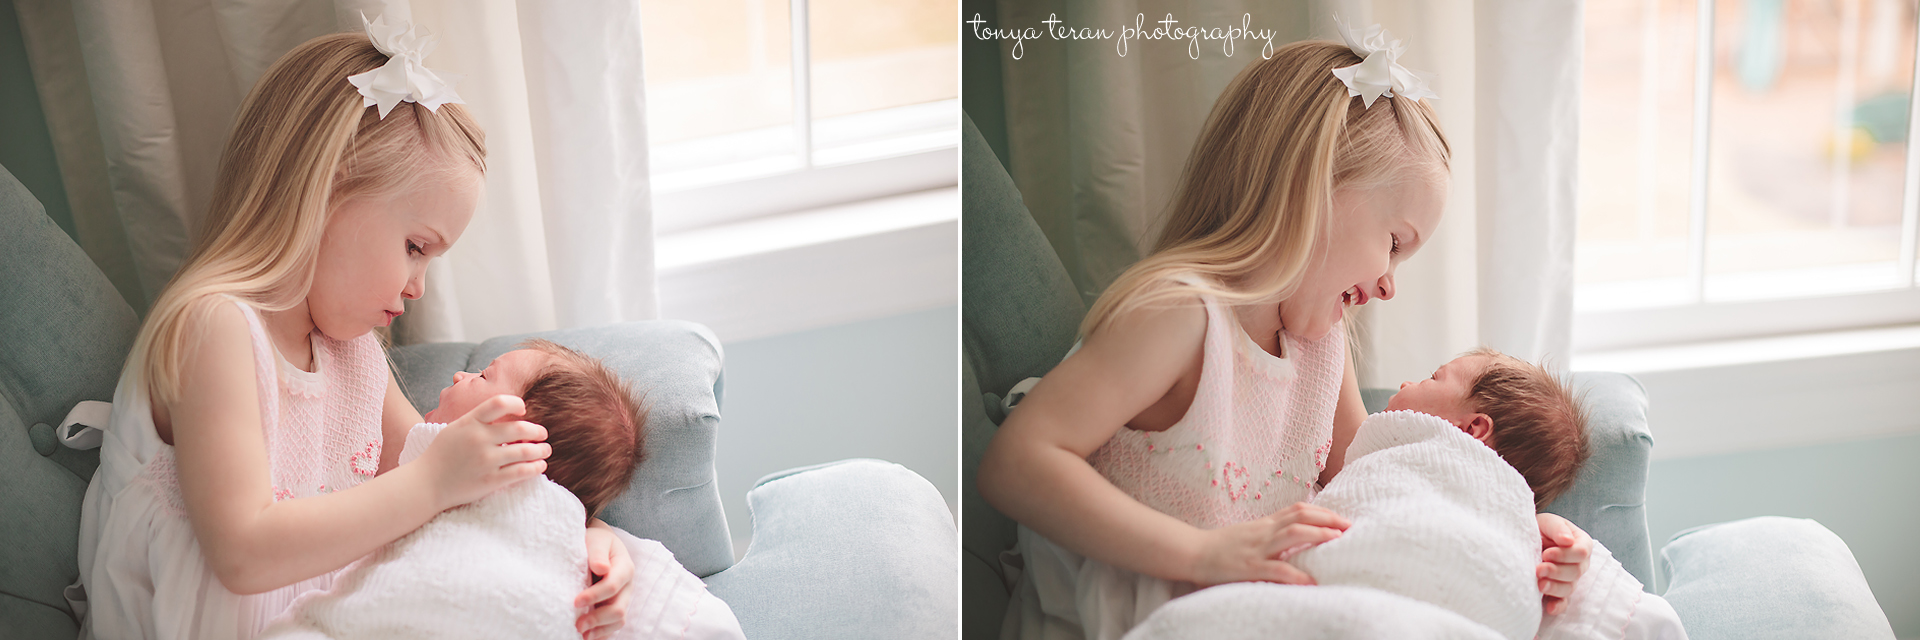 newborn with sibling pose | Rockville, MD Newborn Baby and Family Photographer - Tonya Teran Photography